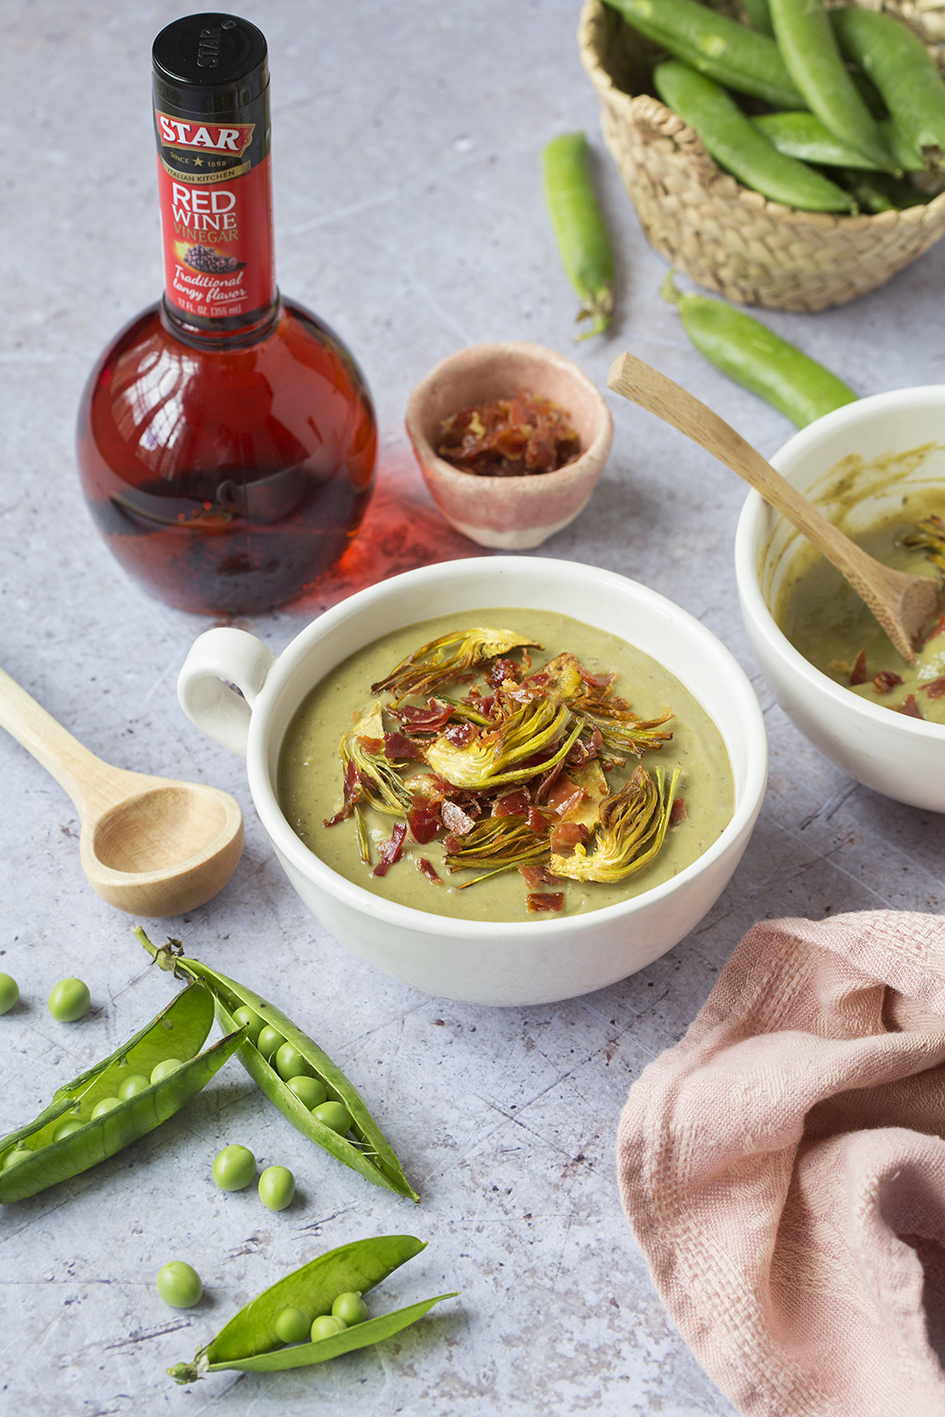 An original vegetable soup, packed with vitamins, minerals and an exotic dash of our popular STAR Modena balsamic vinegar. #STARFineFoods